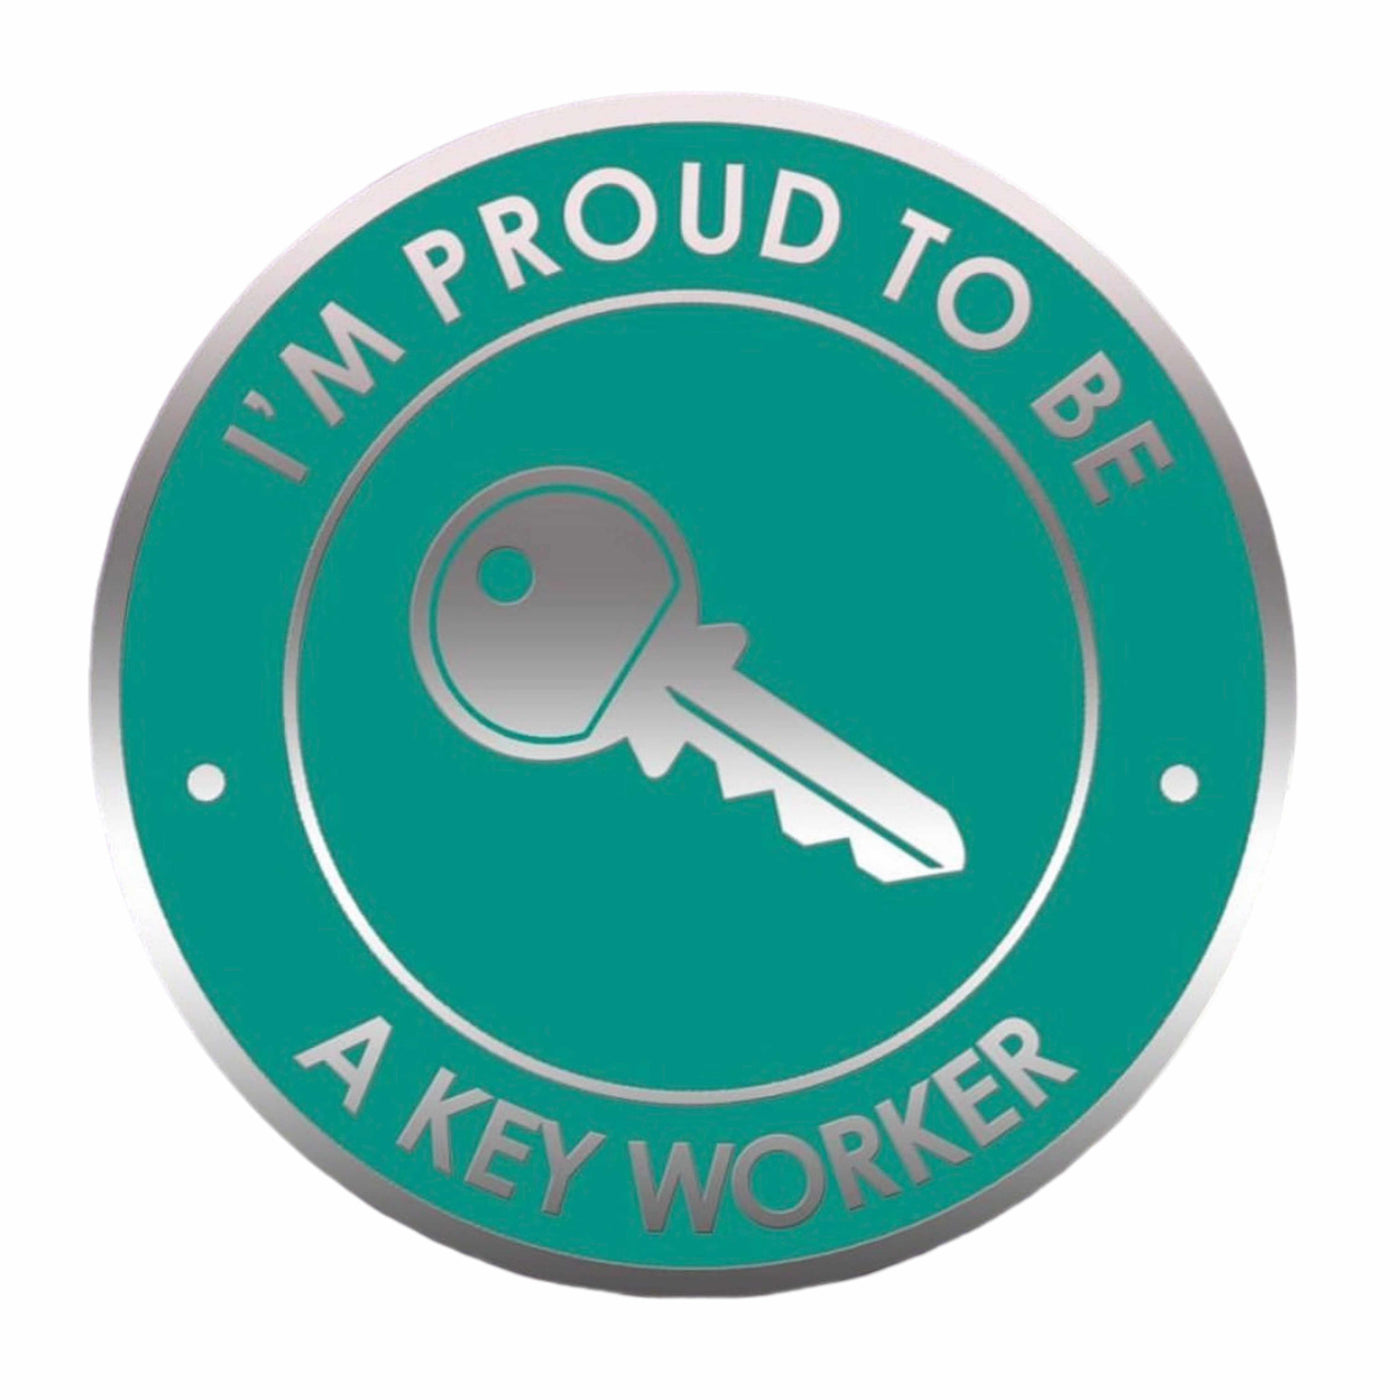 CLEARANCE - Proud to Be a Keyworker Pin Badge